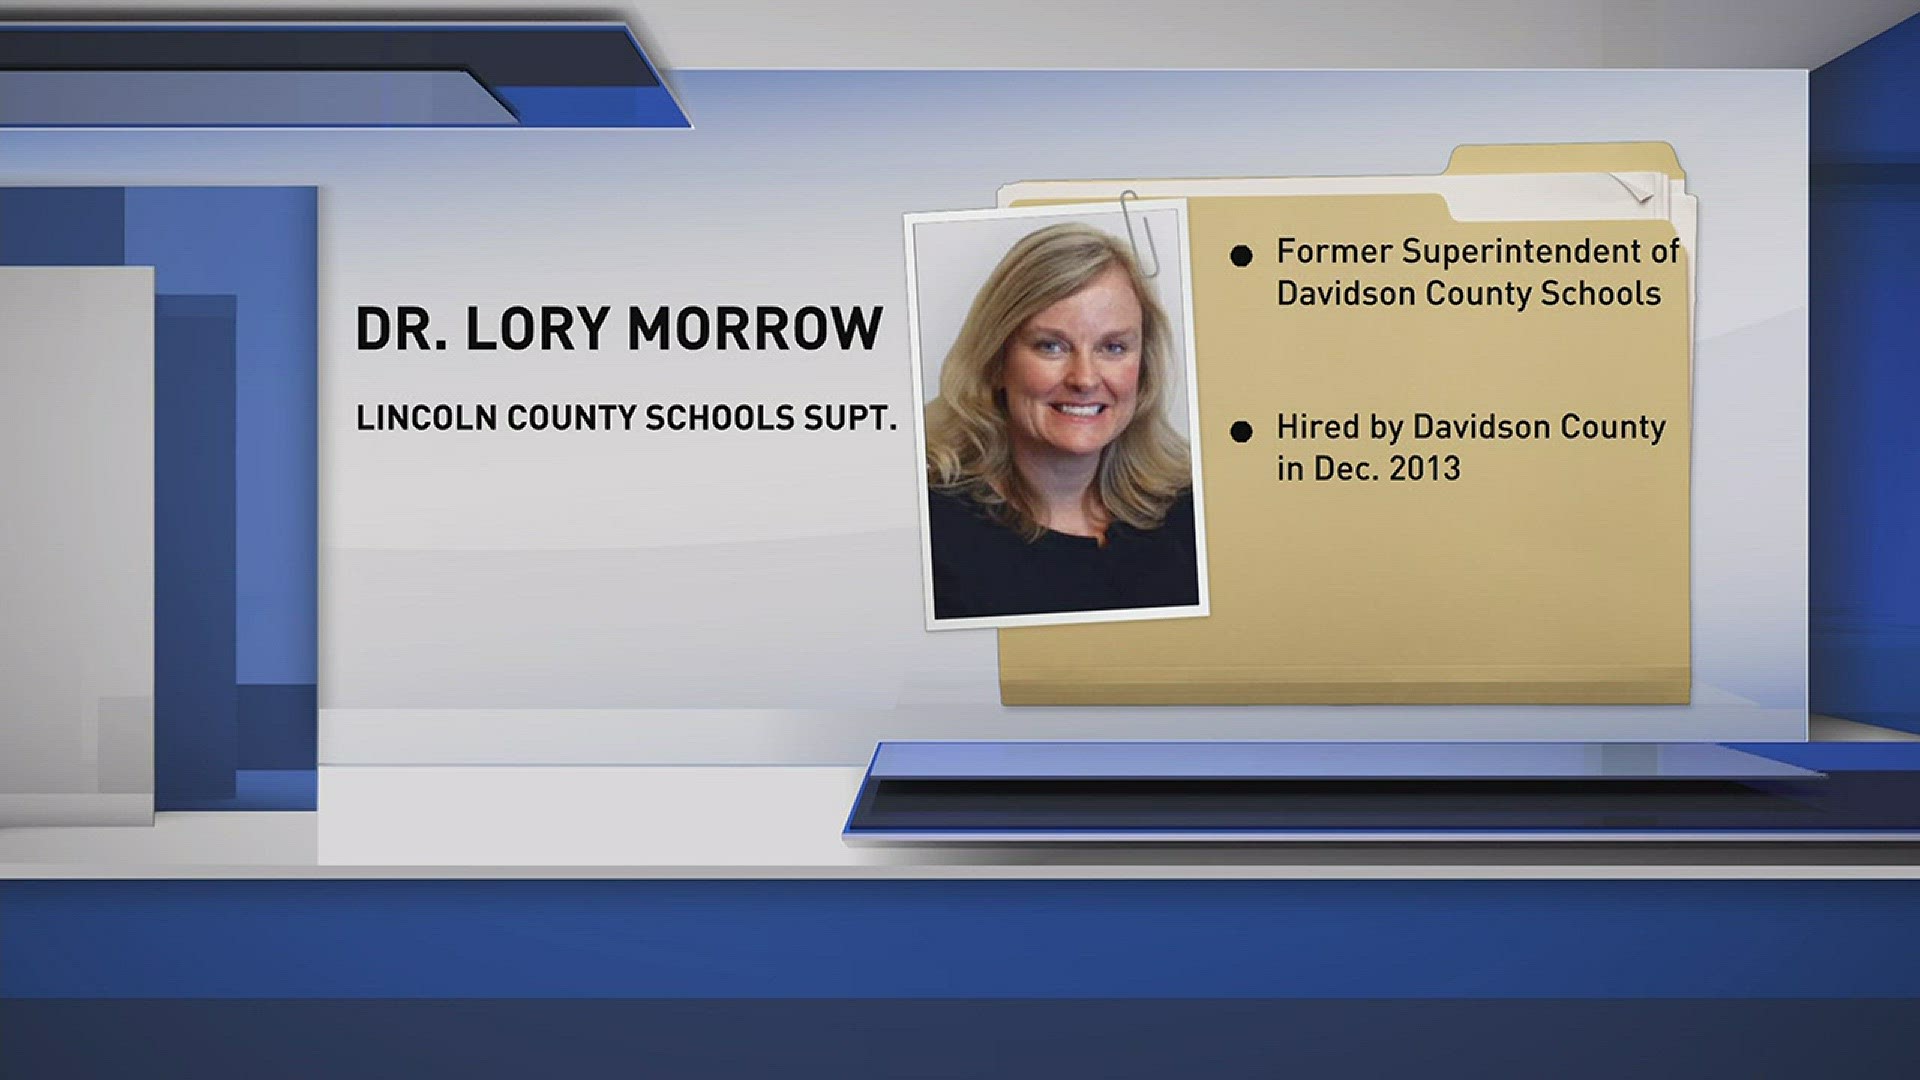 Lincoln County will welcome Dr. Lory Morrow as new superintendent with the 2017-18 school year.